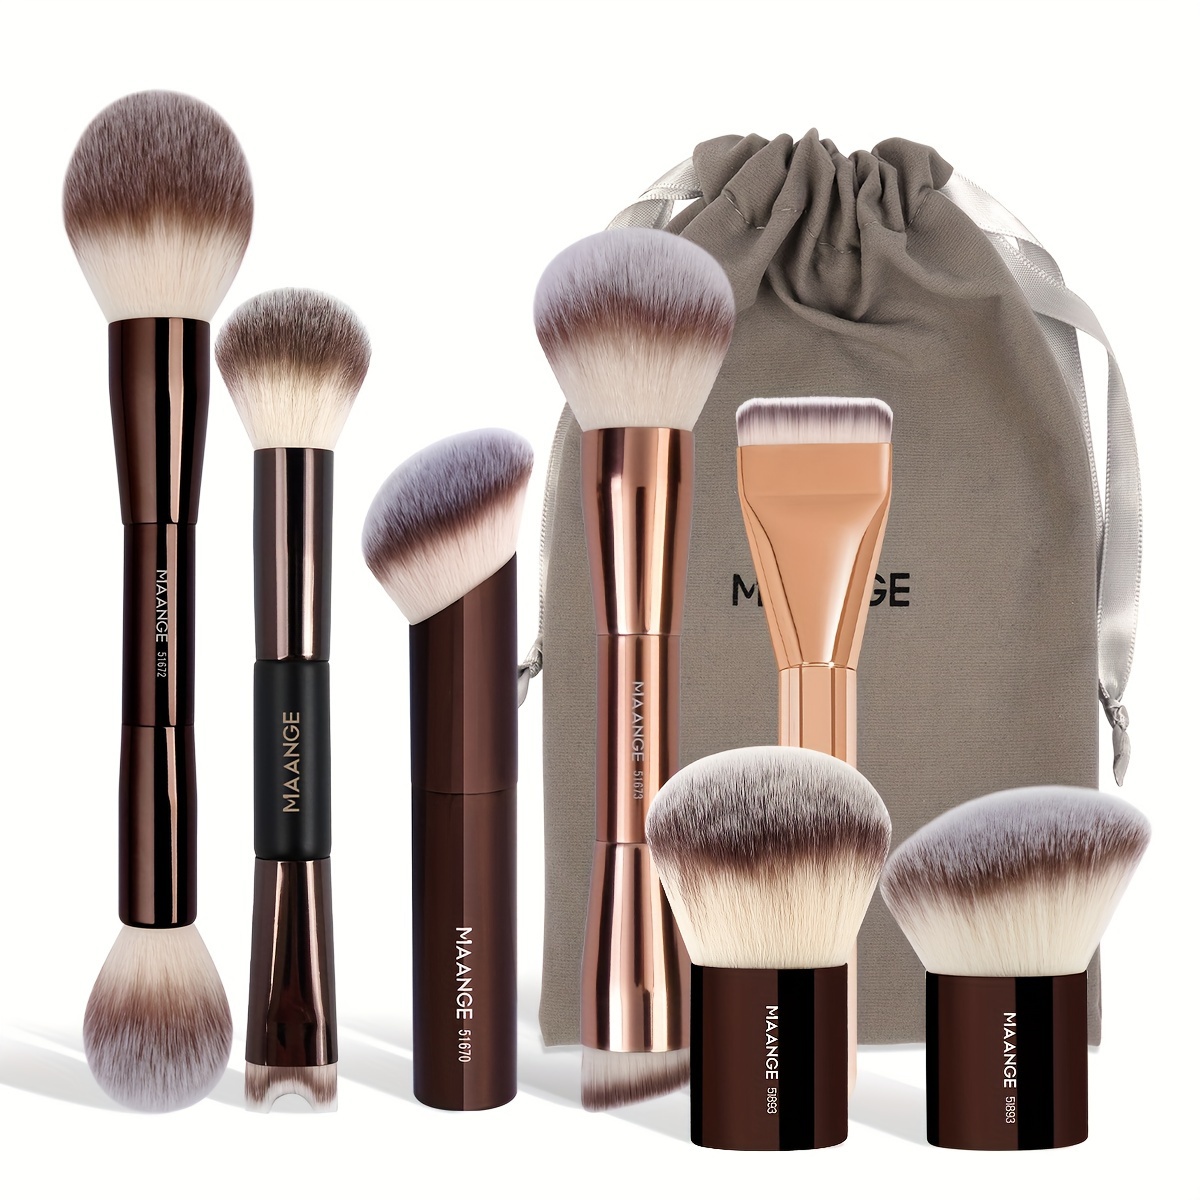 

Maange 7pcs Makeup Brush Set With Soft Nylon Bristles - Includes Foundation, Blush, Contour Brushes & Velvet Pouch - Perfect For Beginners & Travel Mini Makeup Brush Set Brush Makeup Set